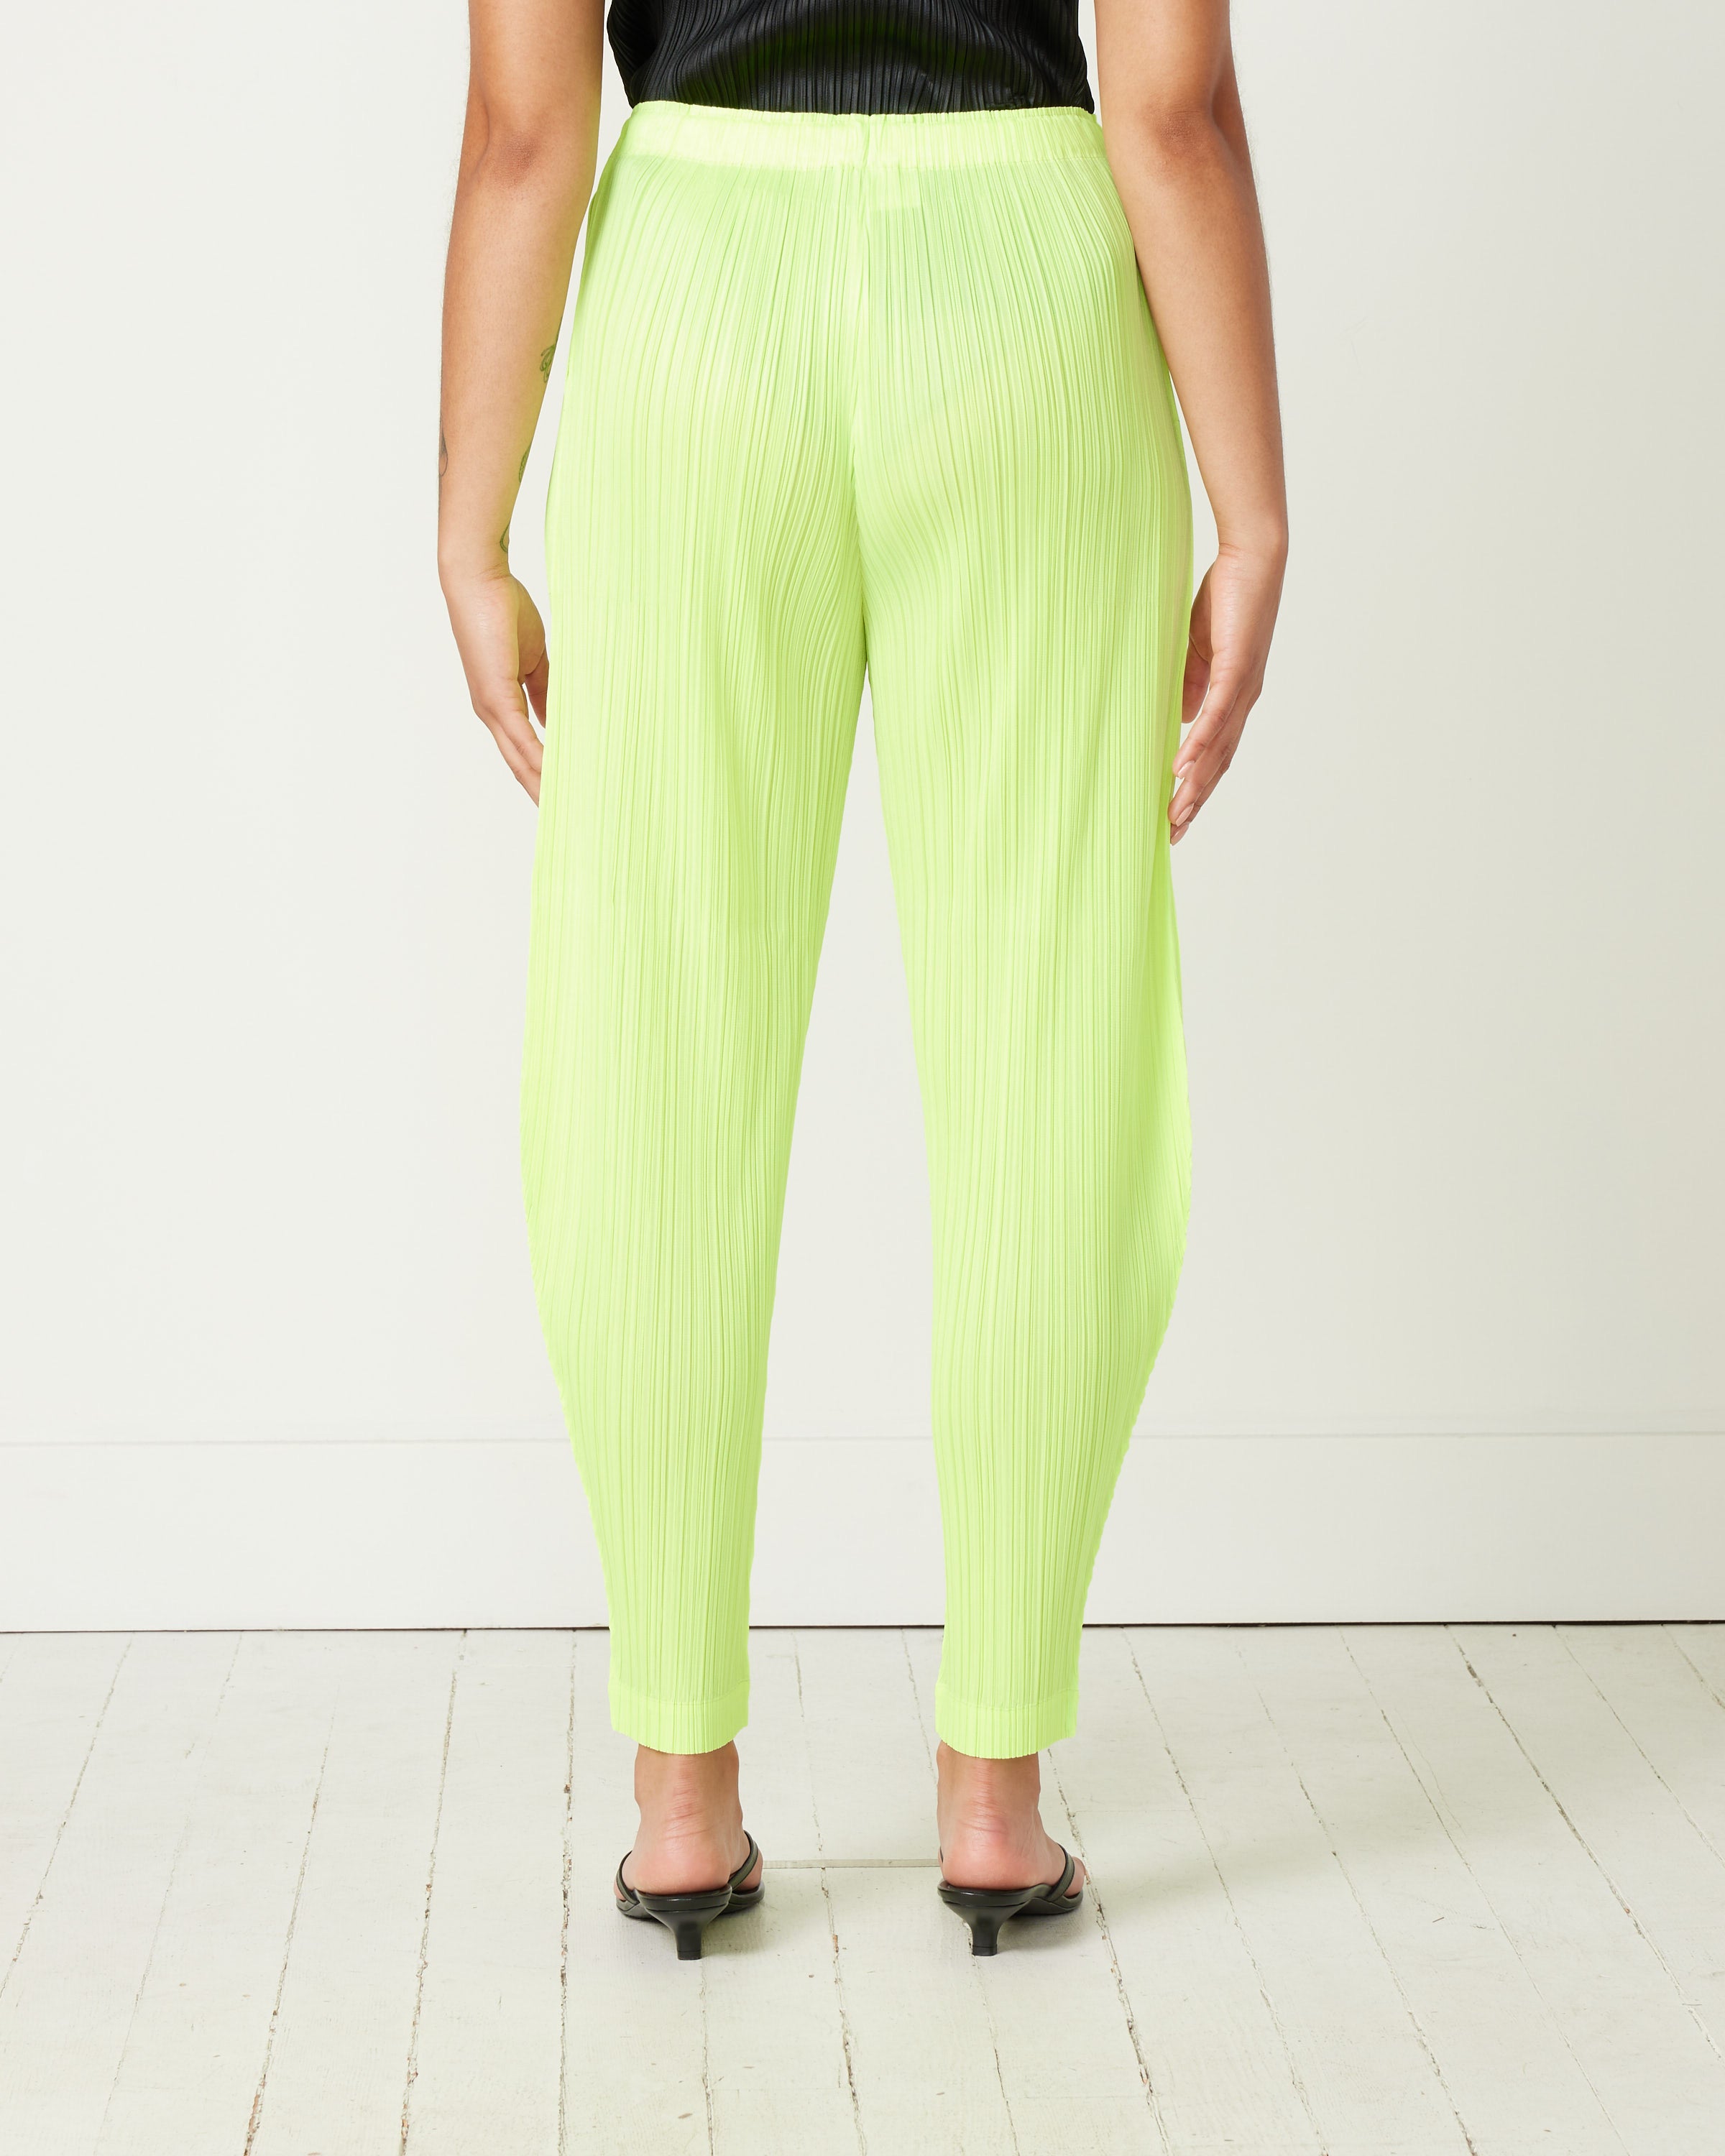 Monthly Colors Pants in Neon Yellow